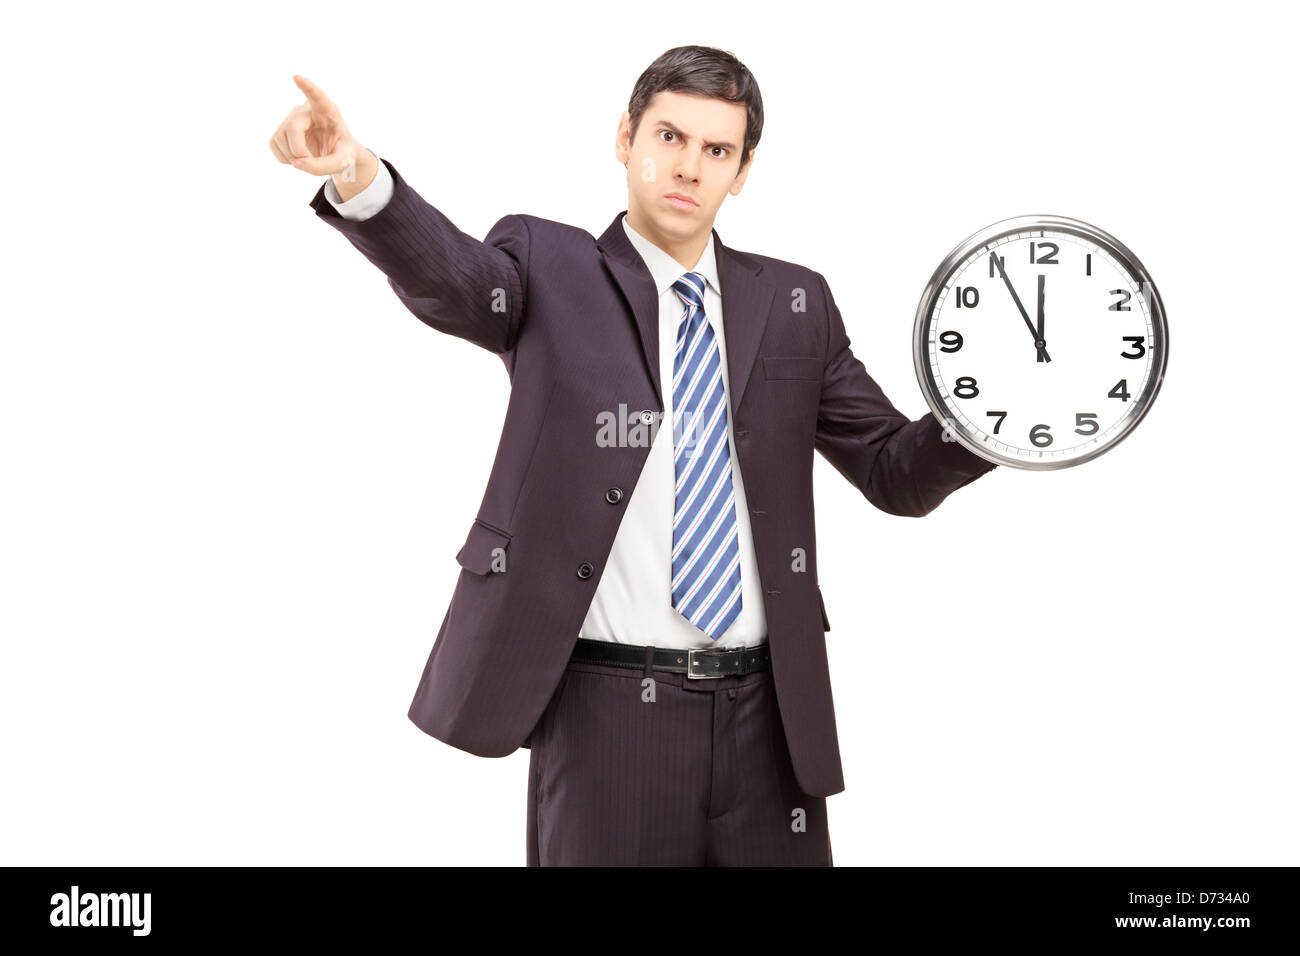 Angry businessman holding a clock and pointing with a finger, isolated on white background Stock Photo